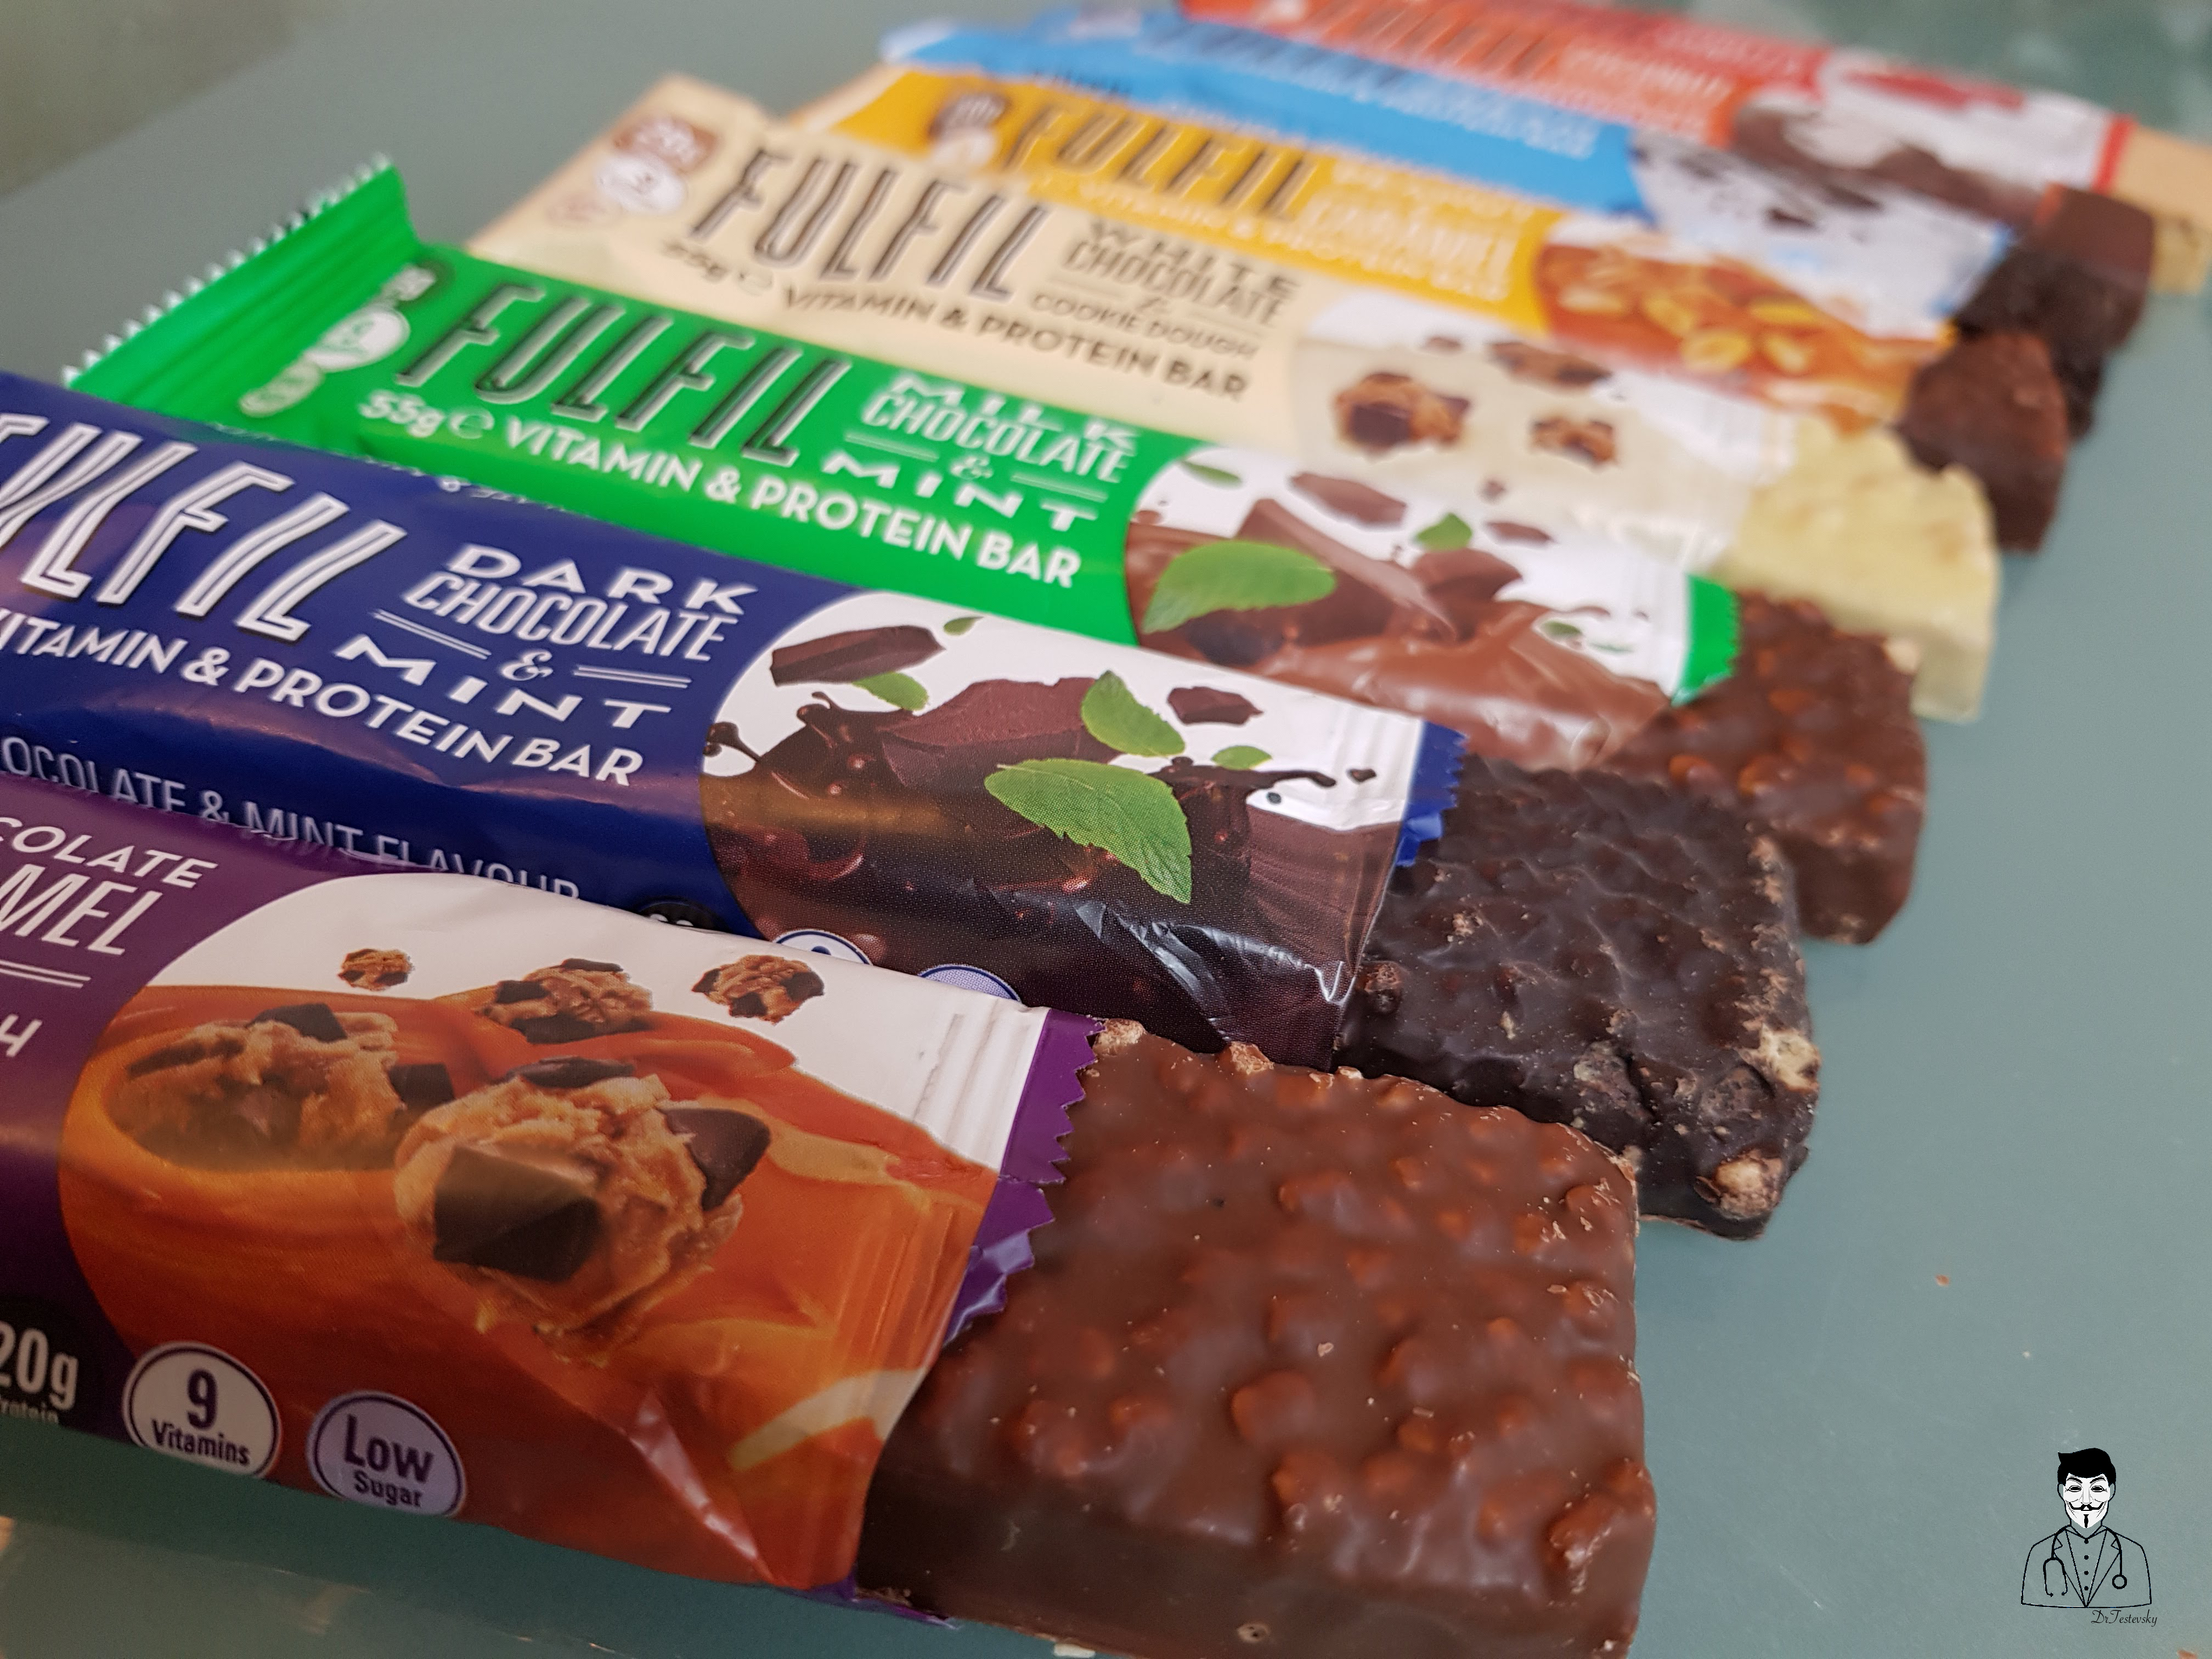 Fulfil Nutrition – Vitamin and Protein Bar